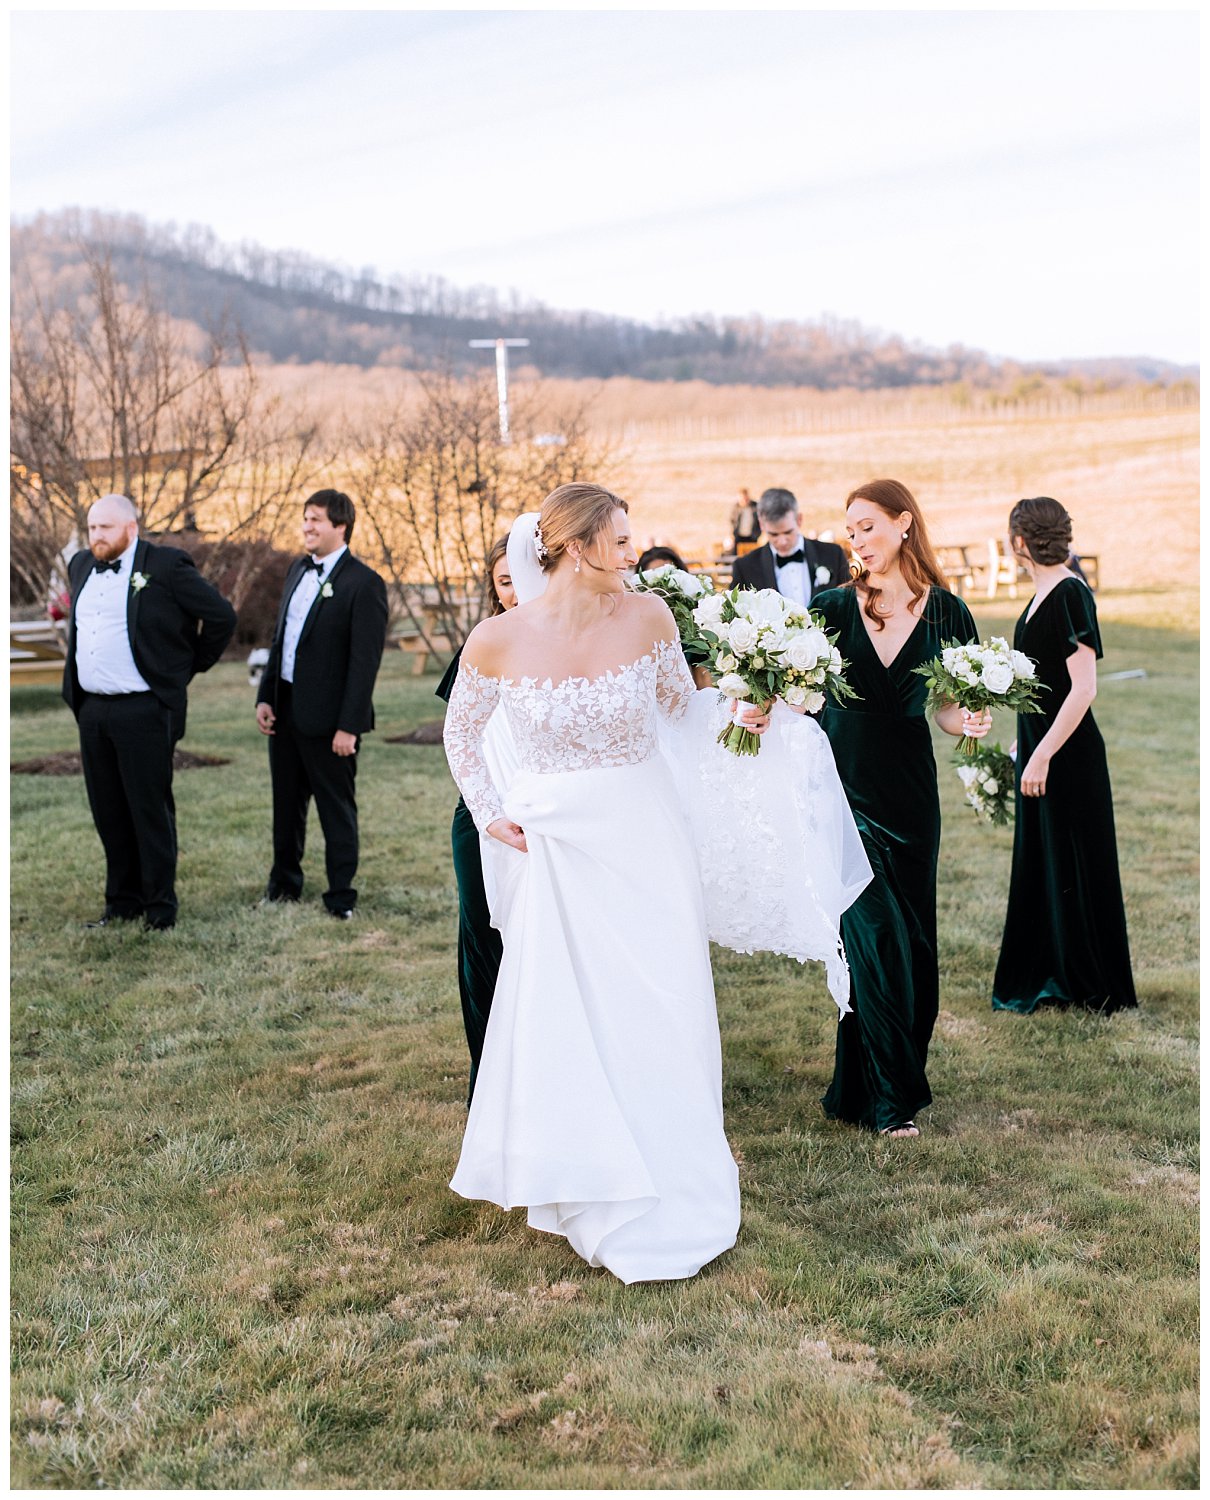 Bride and groom with wedding party at Early Mountain Vineyard in Charlottesville, Virginia